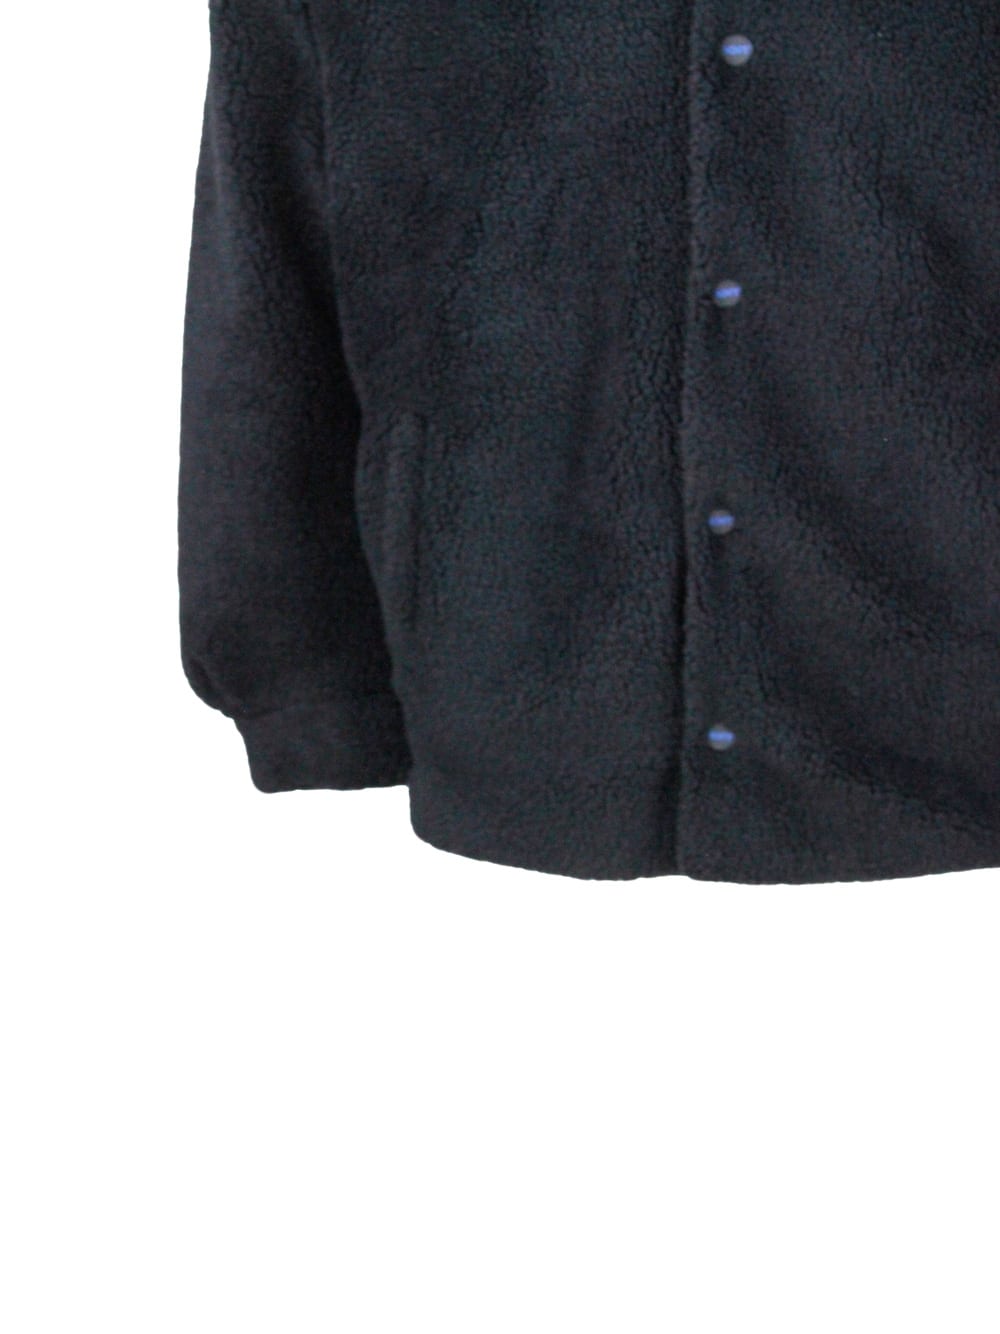 Shop Kiton Vest Jacket With Snap Button Closure In Soft Eco Bear. Gro Trims And Matching Inner Lining In Blu Navy